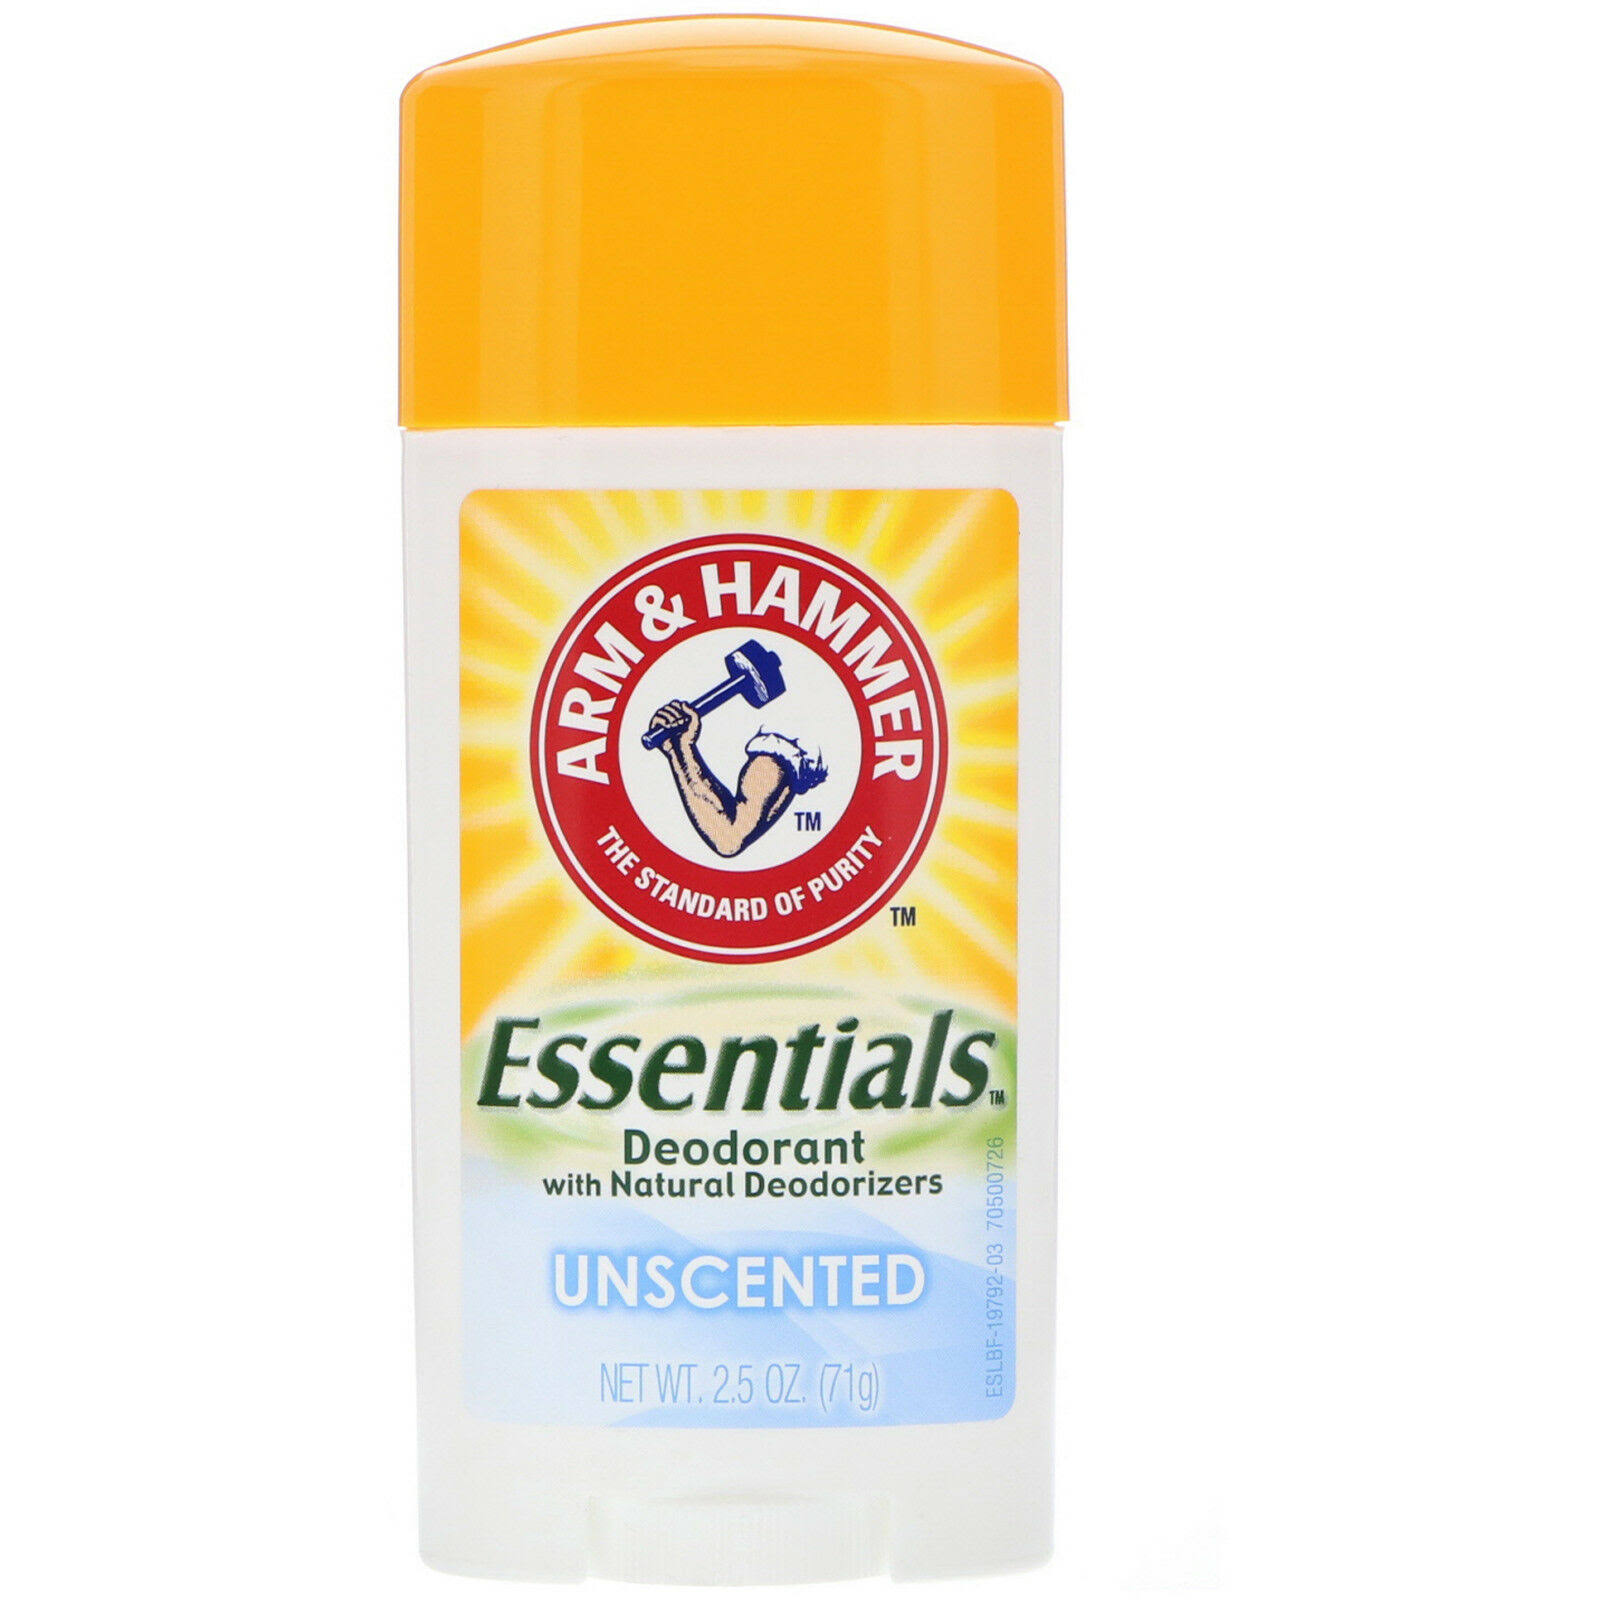 Arm and Hammer Essentials Solid Deodorant - Unscented, 2.5oz